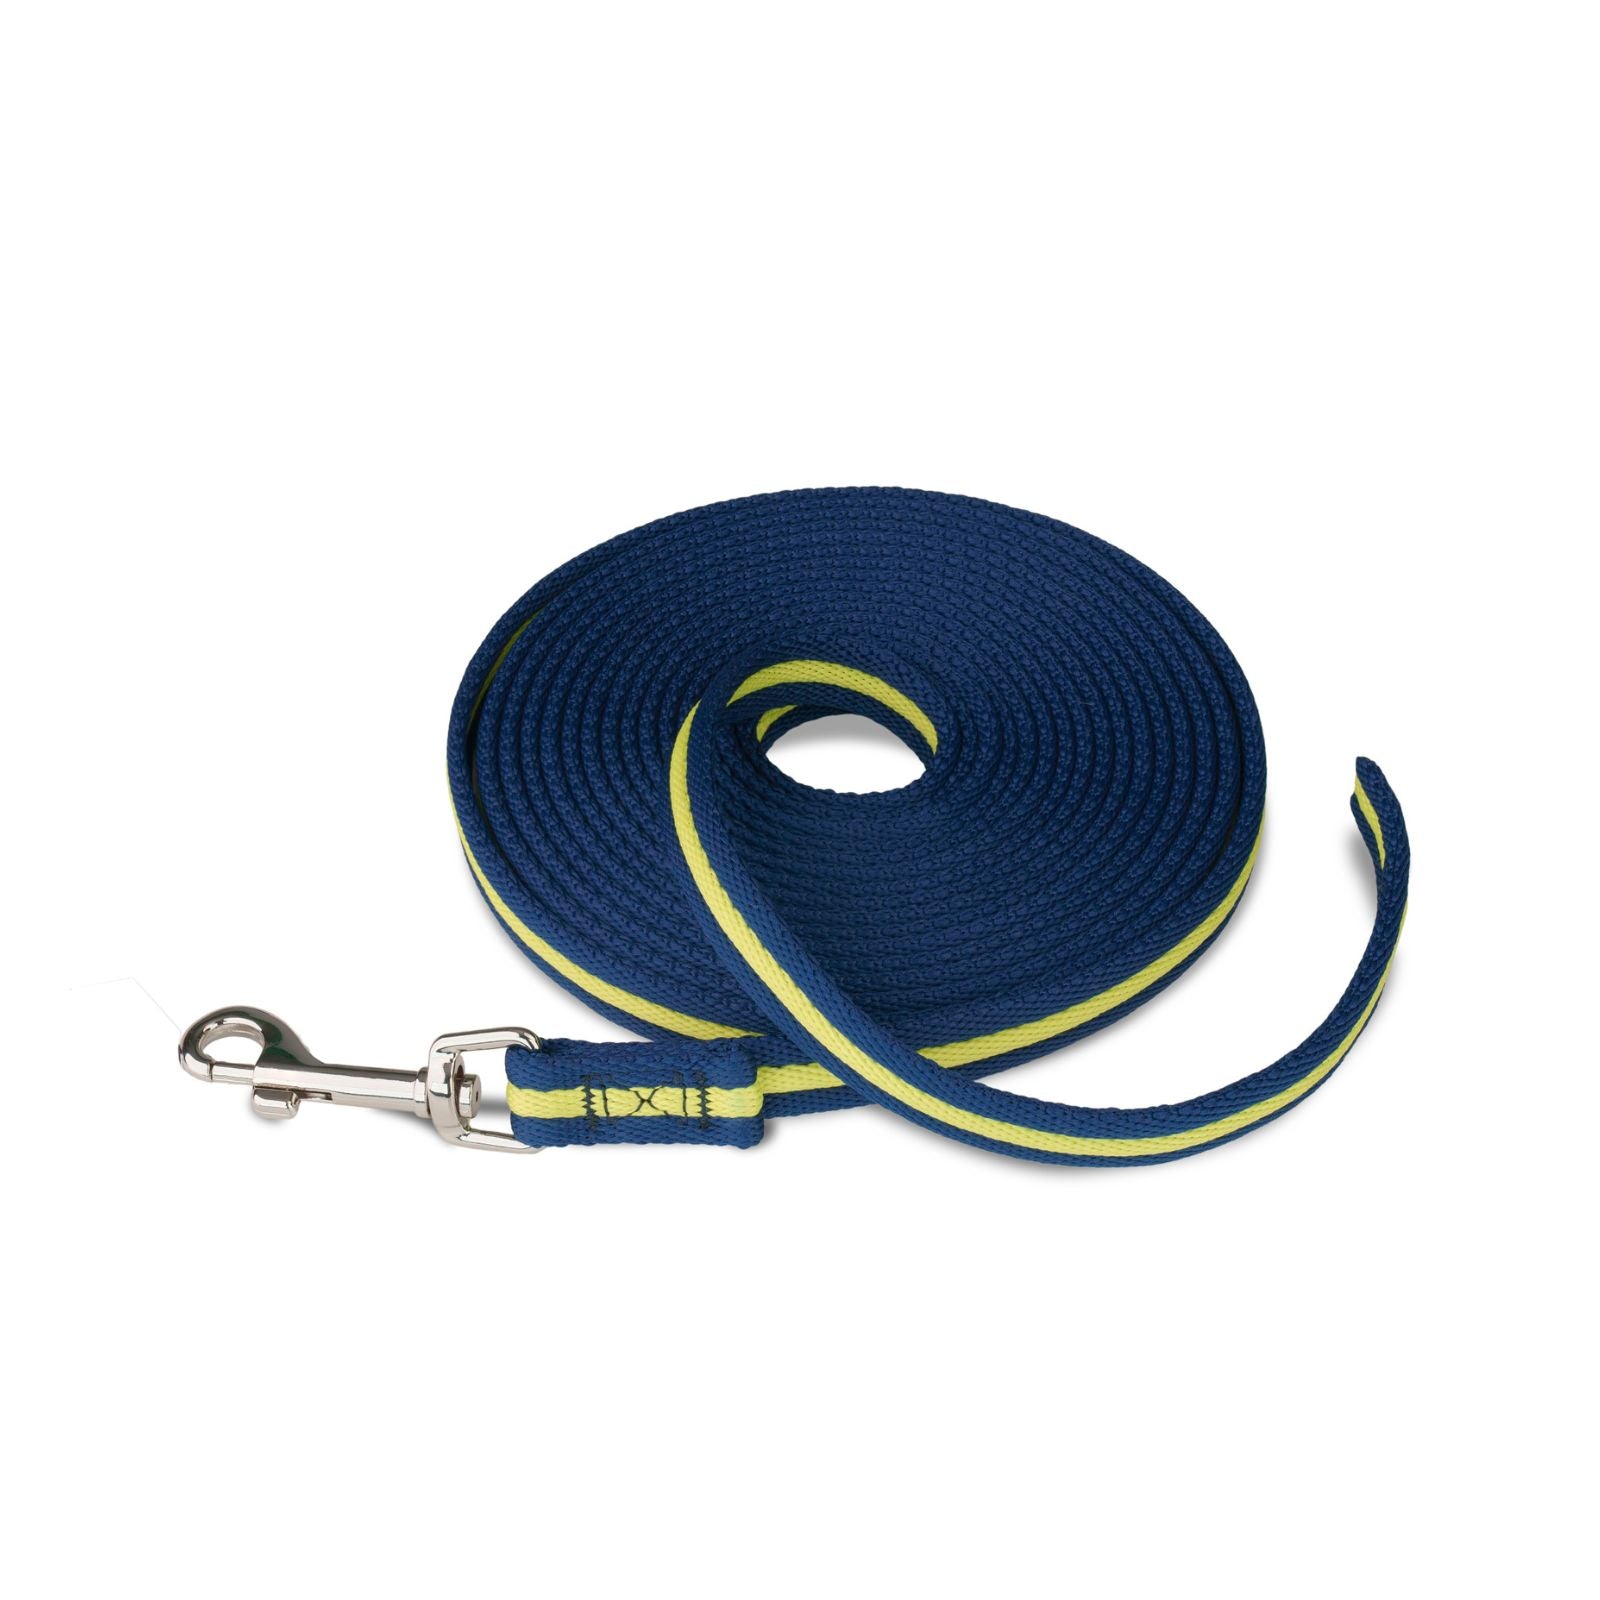 Navy and lime 5m recall dog coaching leash with stainless steel clip.